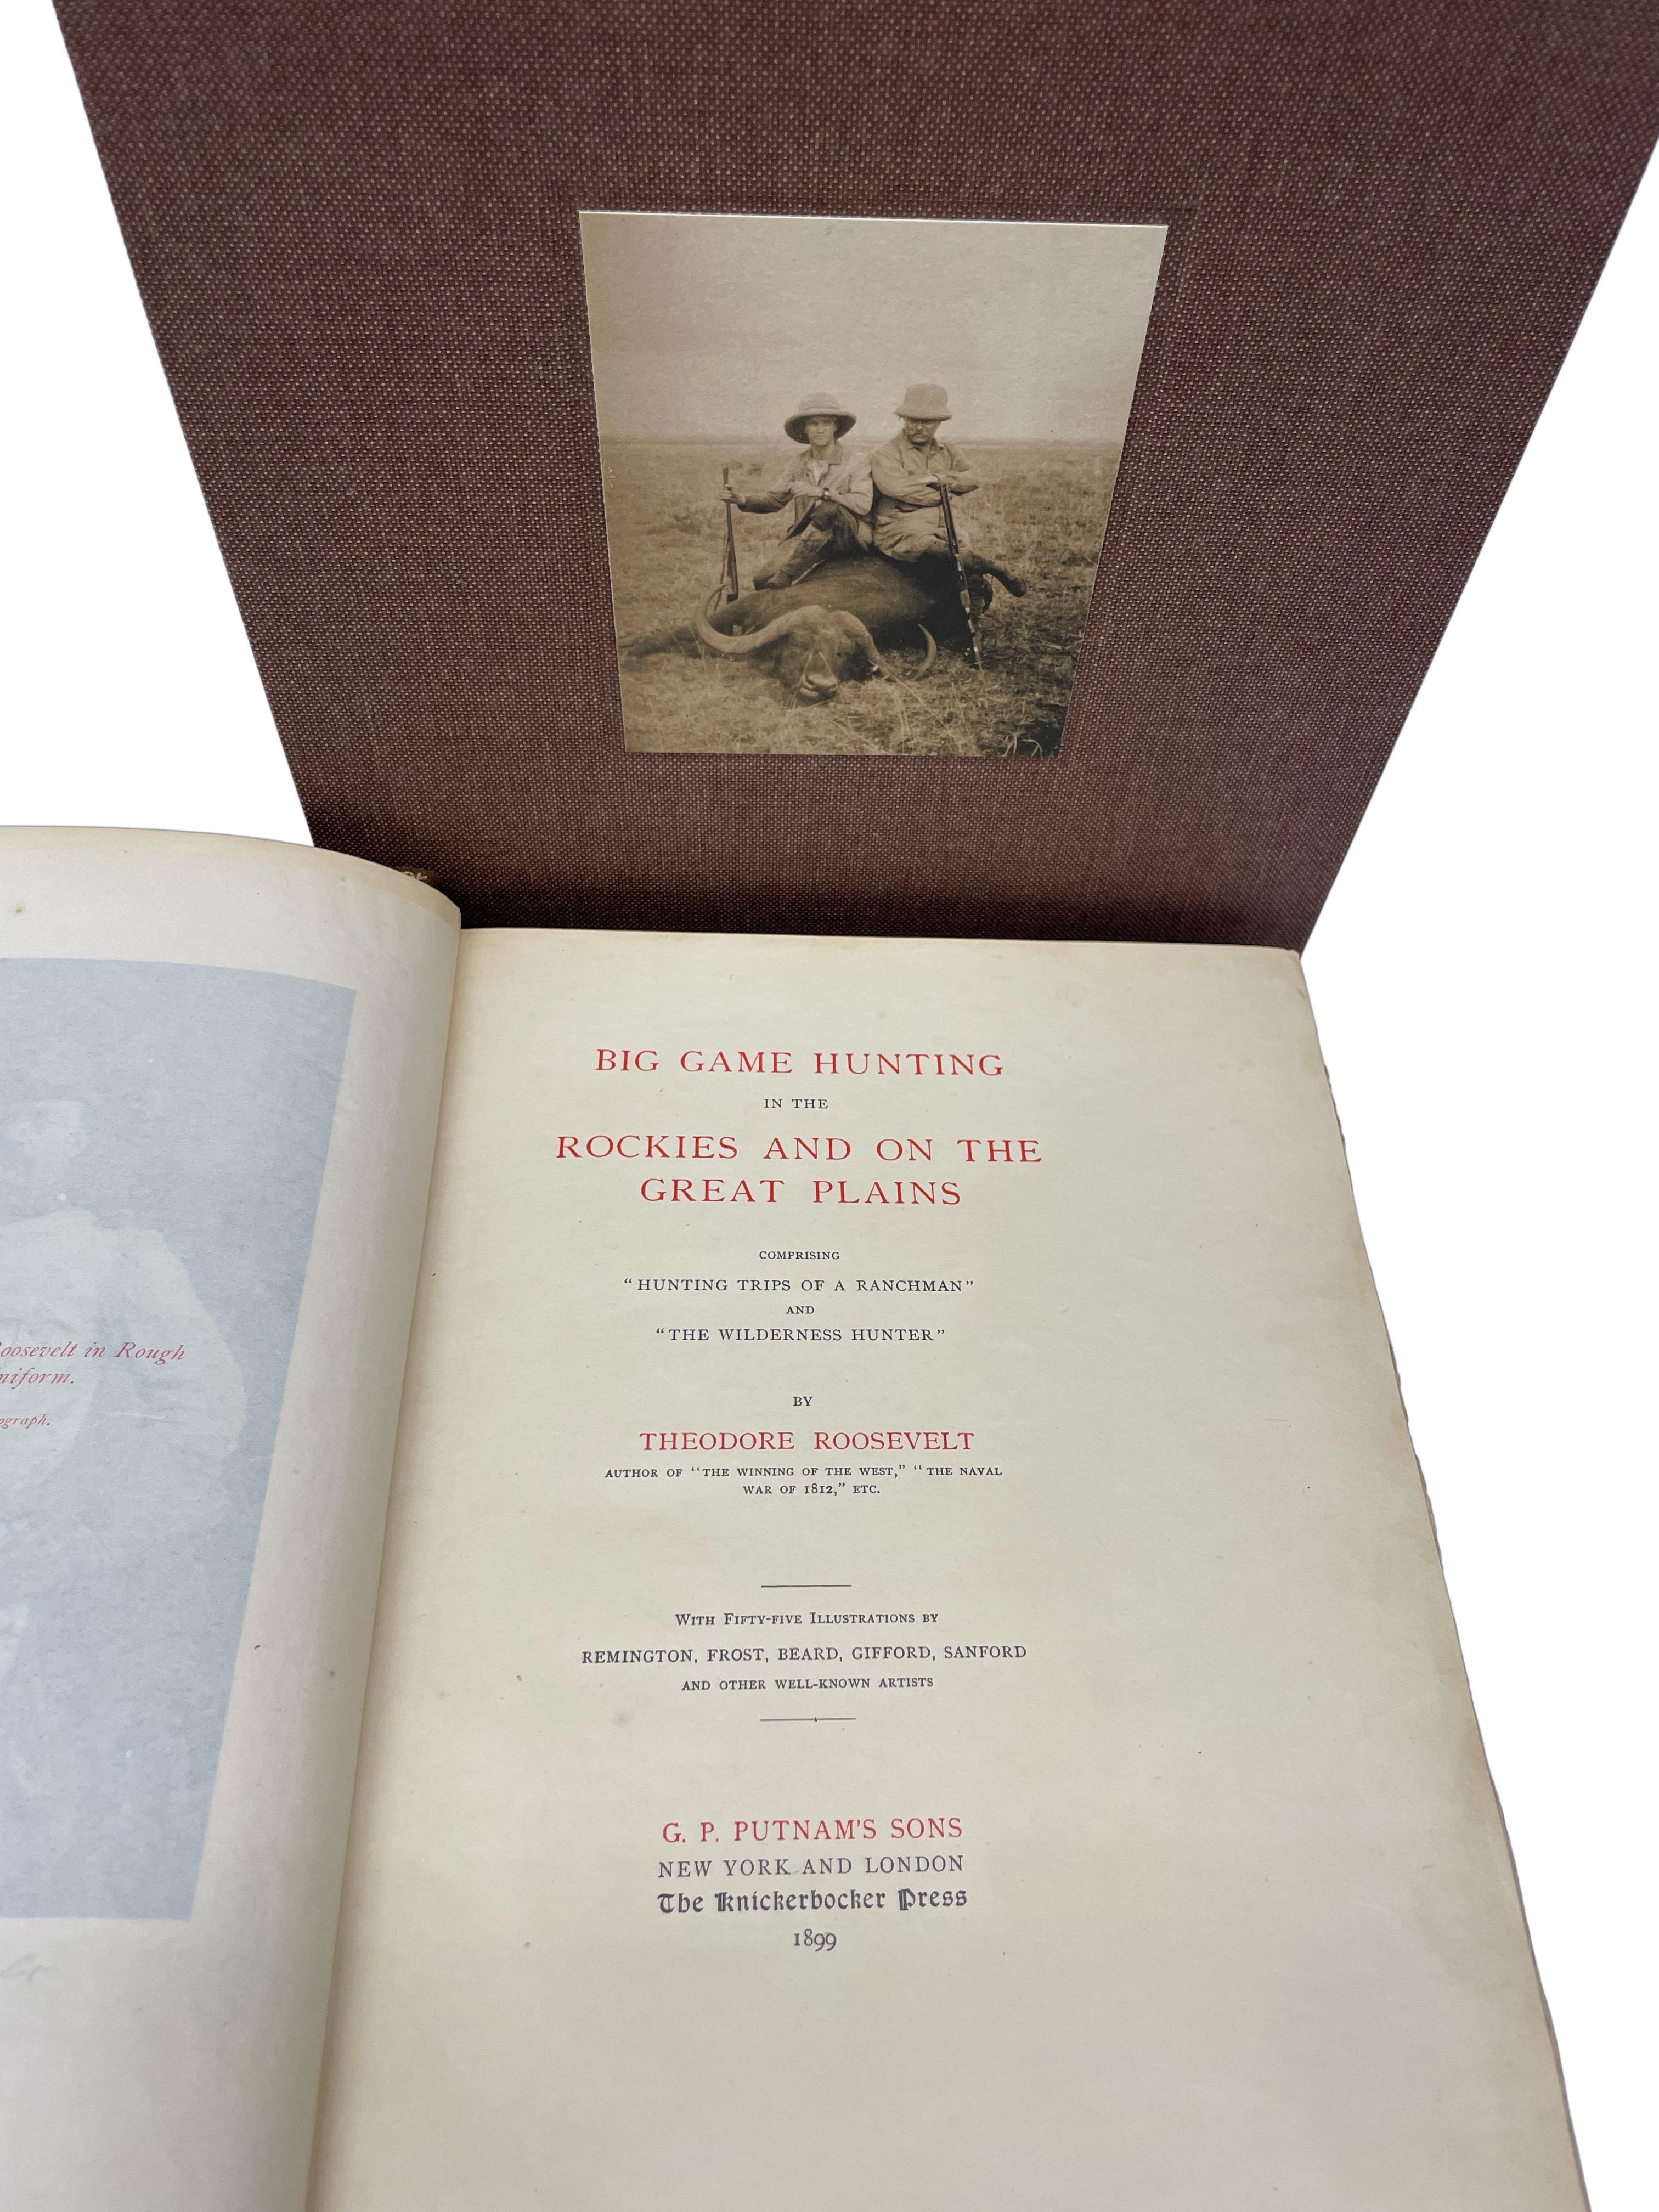 American Big Game Hunting, Signed by Theodore Roosevelt, #606 of 1000, 1899